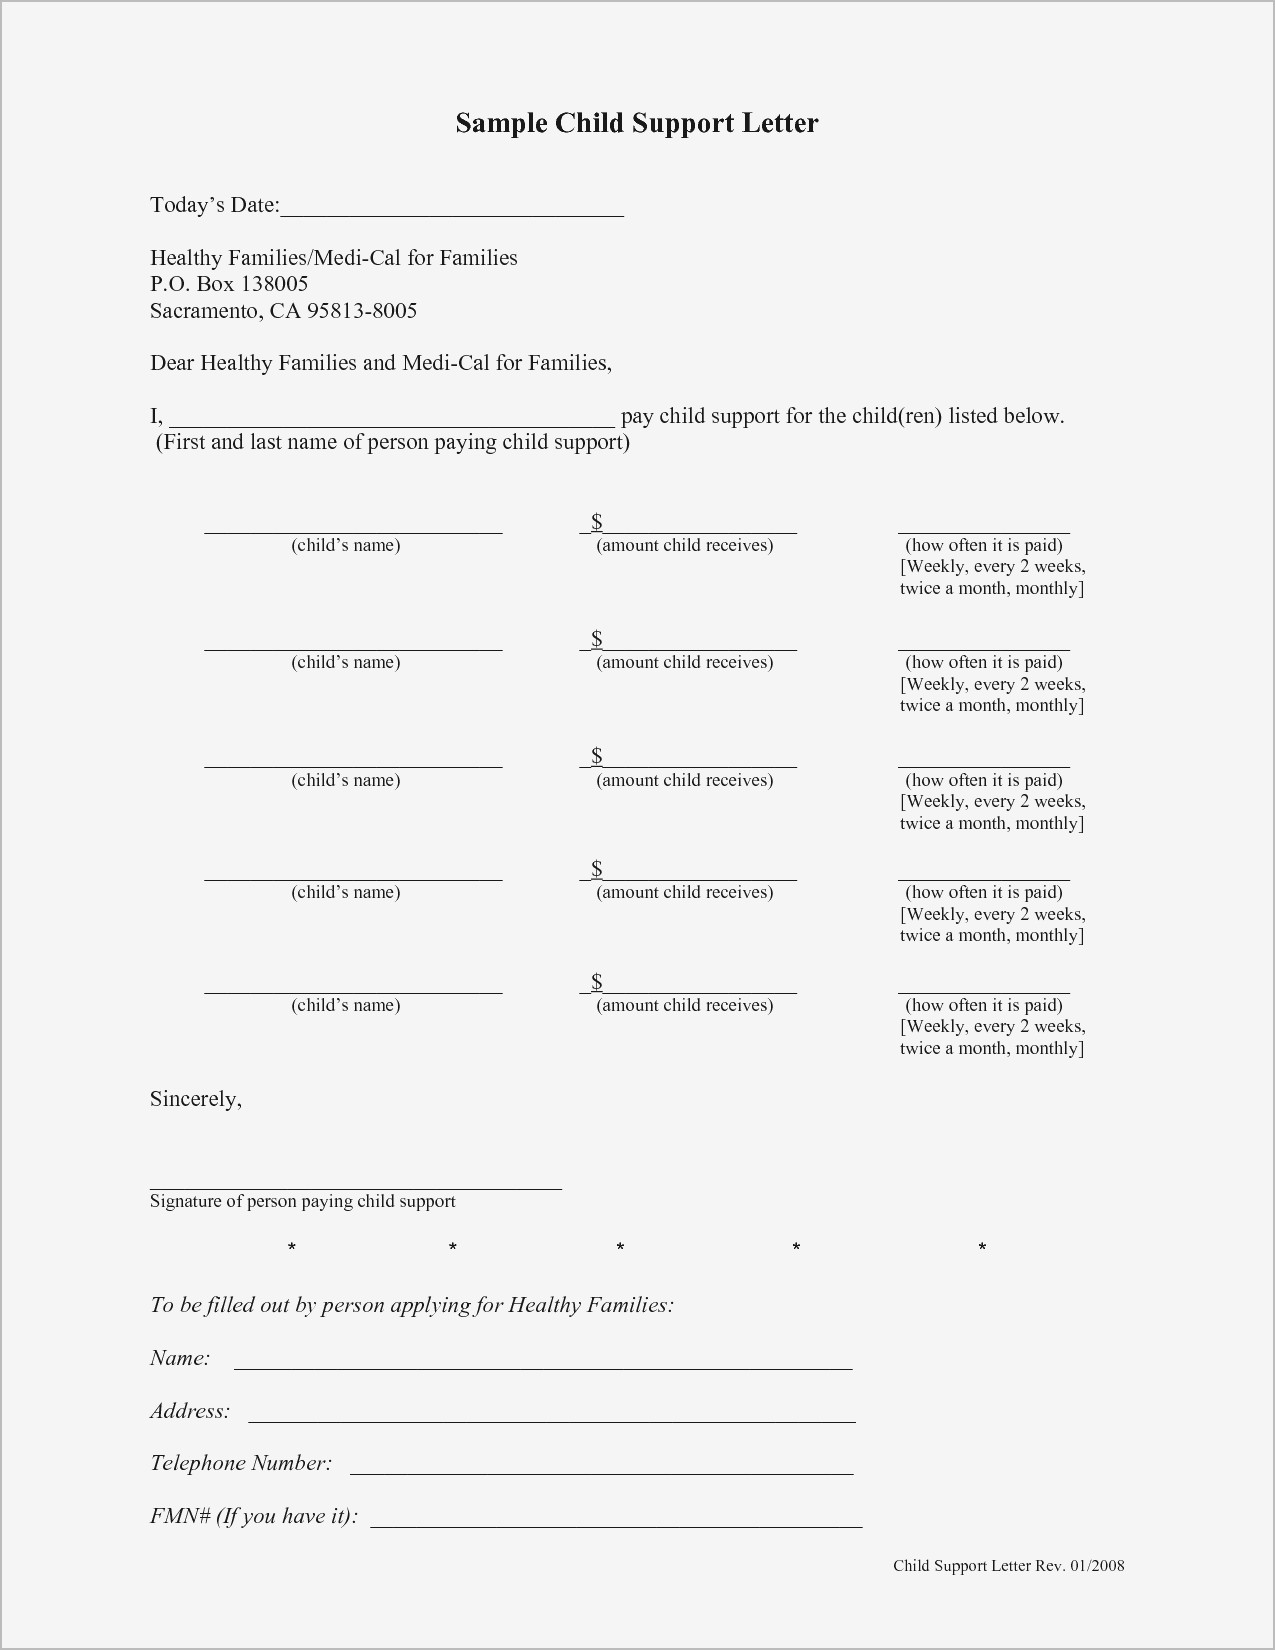 Child Support Letter Of Agreement Template - Sample Child Support Agreement Samples